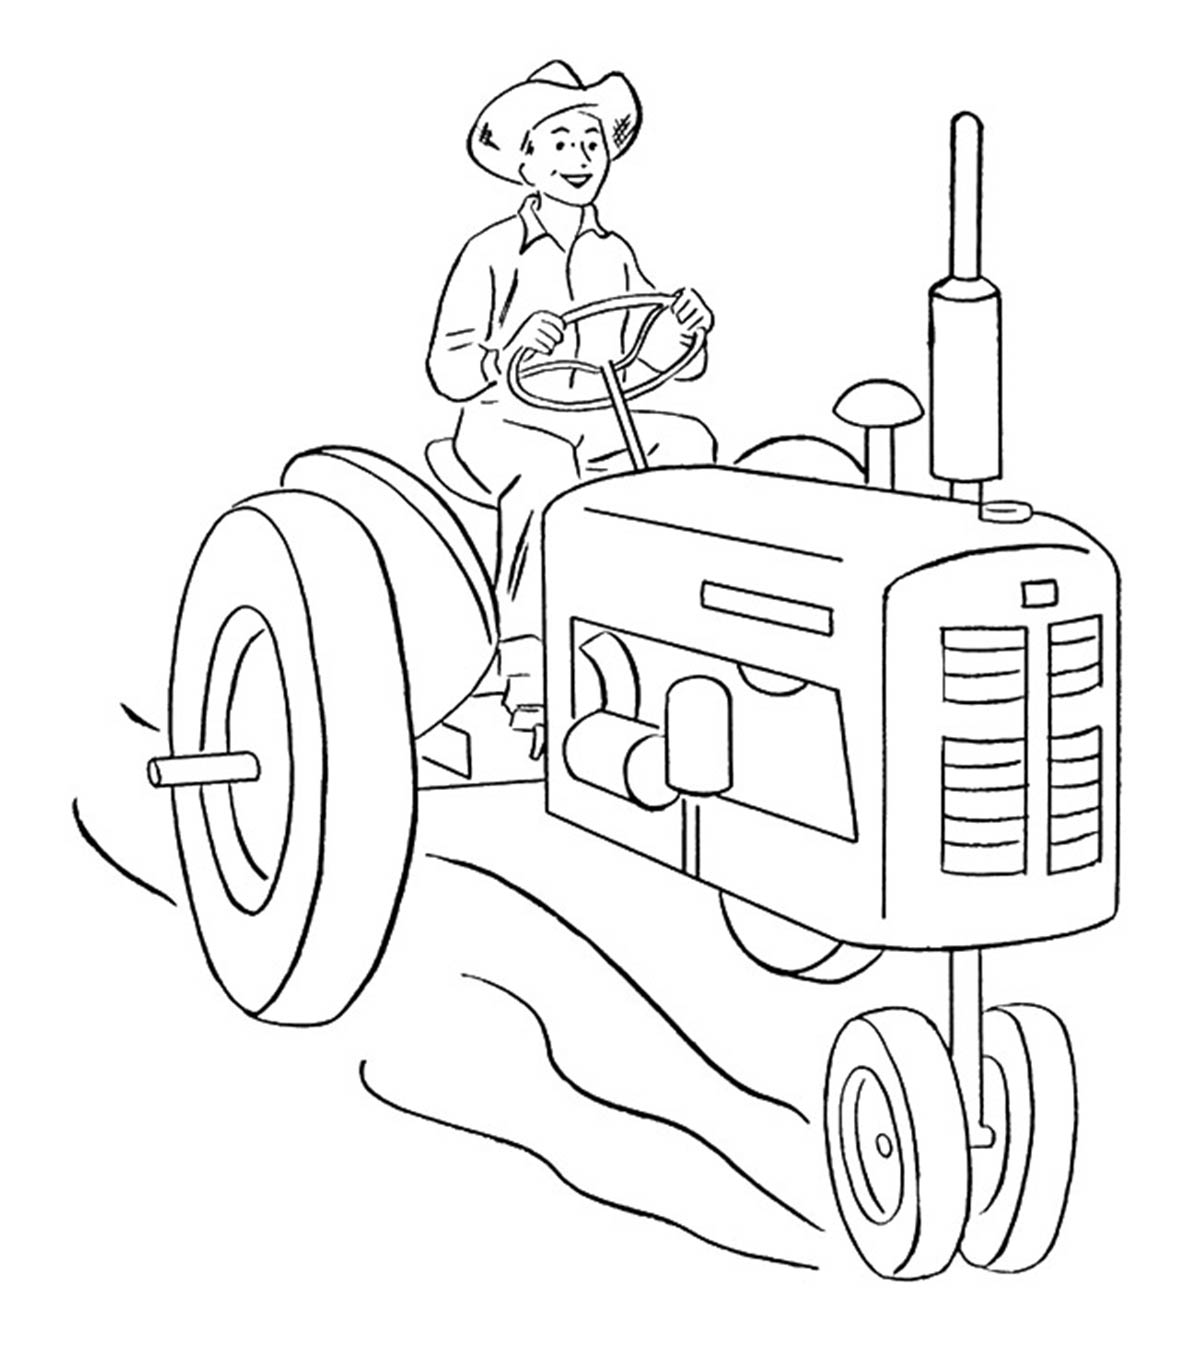 10 Best John Deere Coloring Pages Your Toddler Will Love To Color